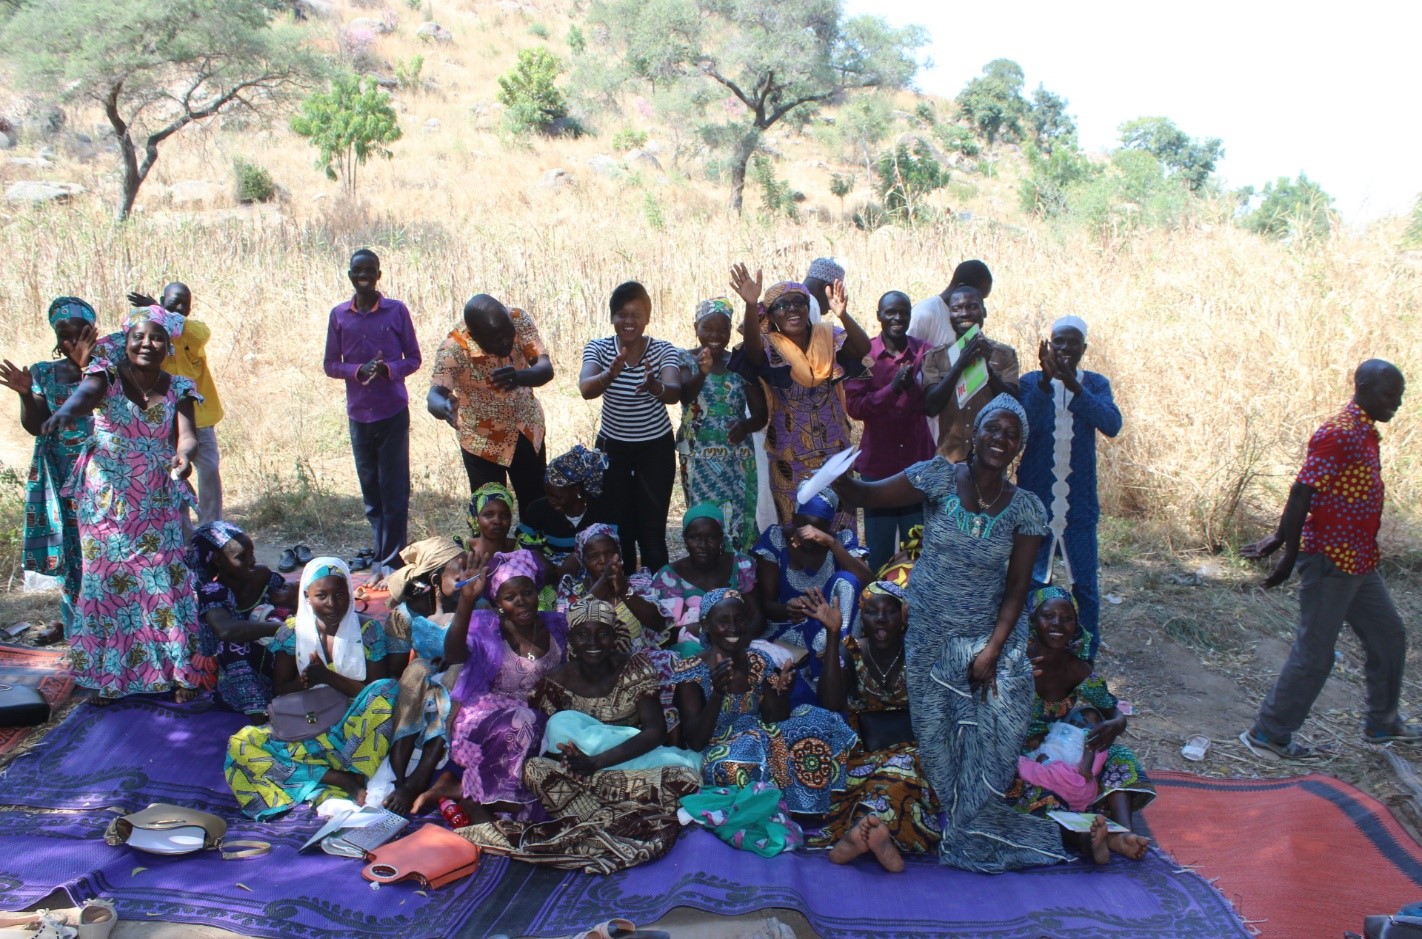 Group photo with Meri Women after the Douvangar Workshop